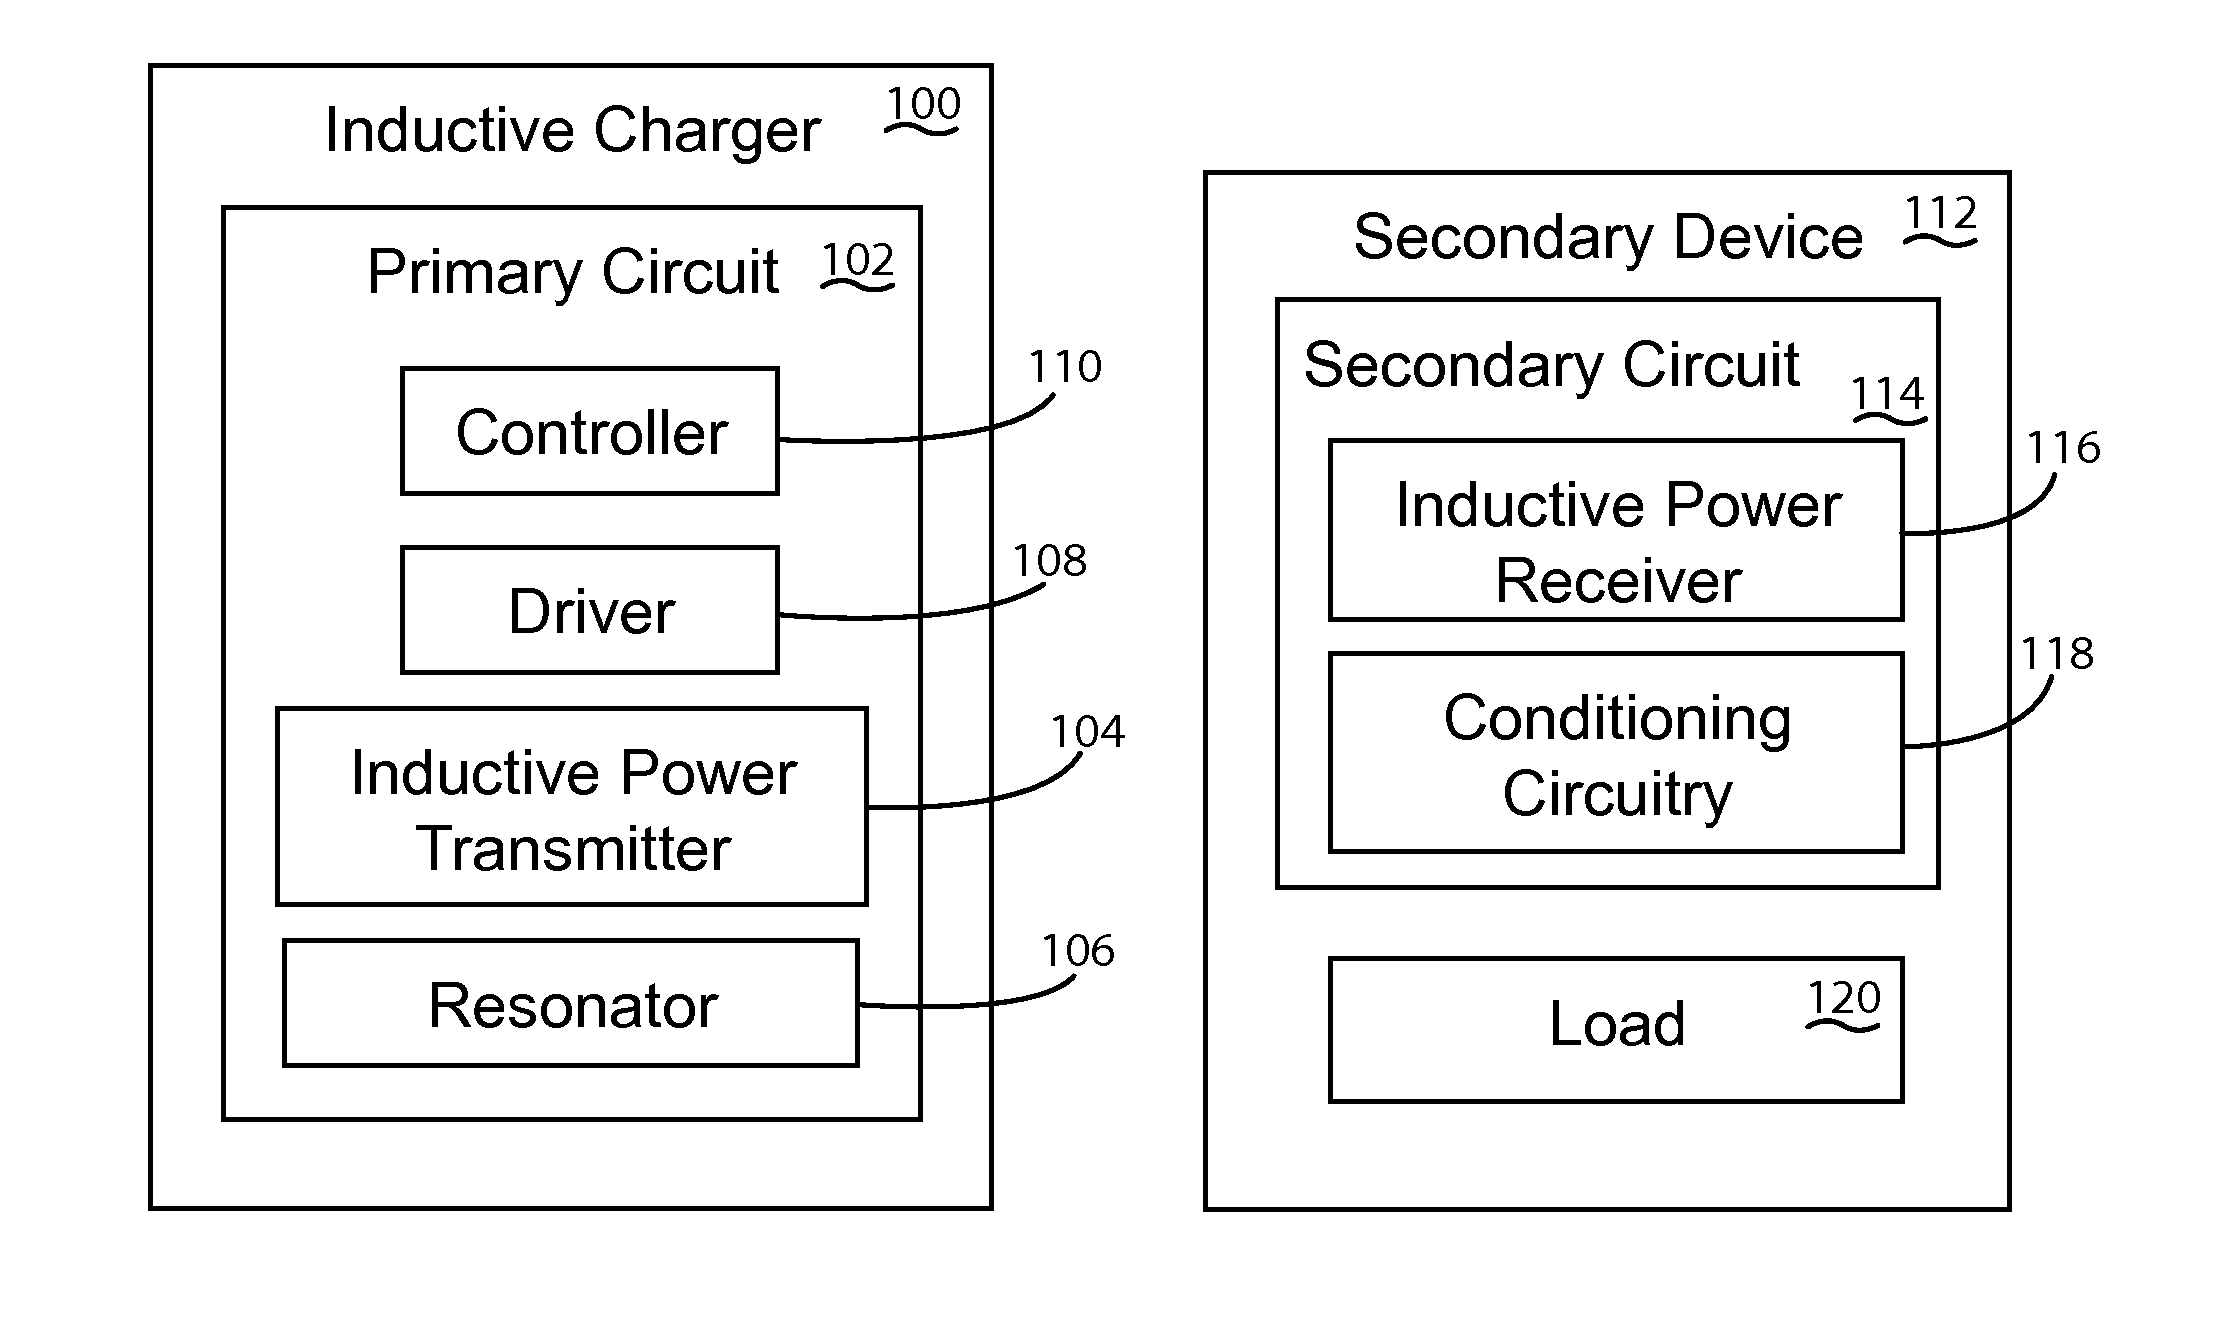 System and method for detecting, characterizing, and tracking an inductive power receiver